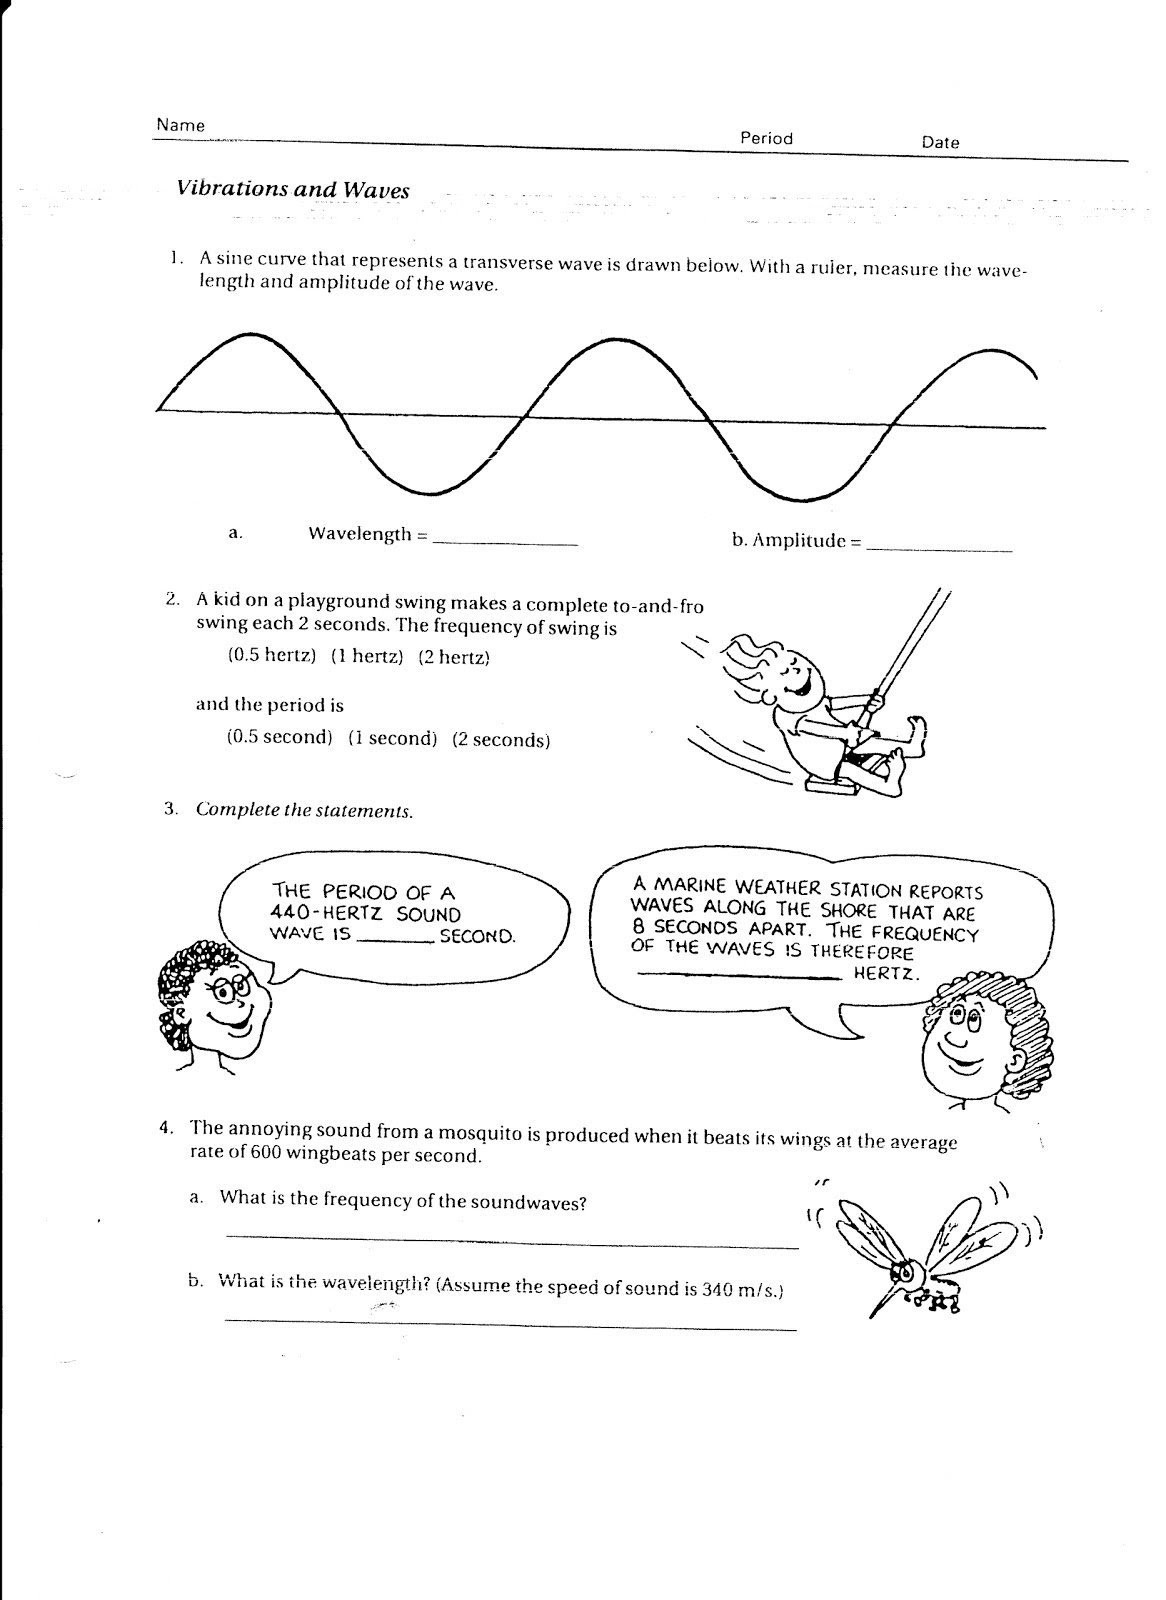 The Electromagnetic Spectrum Worksheet Answers Waves sound and Light Answer Key Philips Blue Icicle Lights